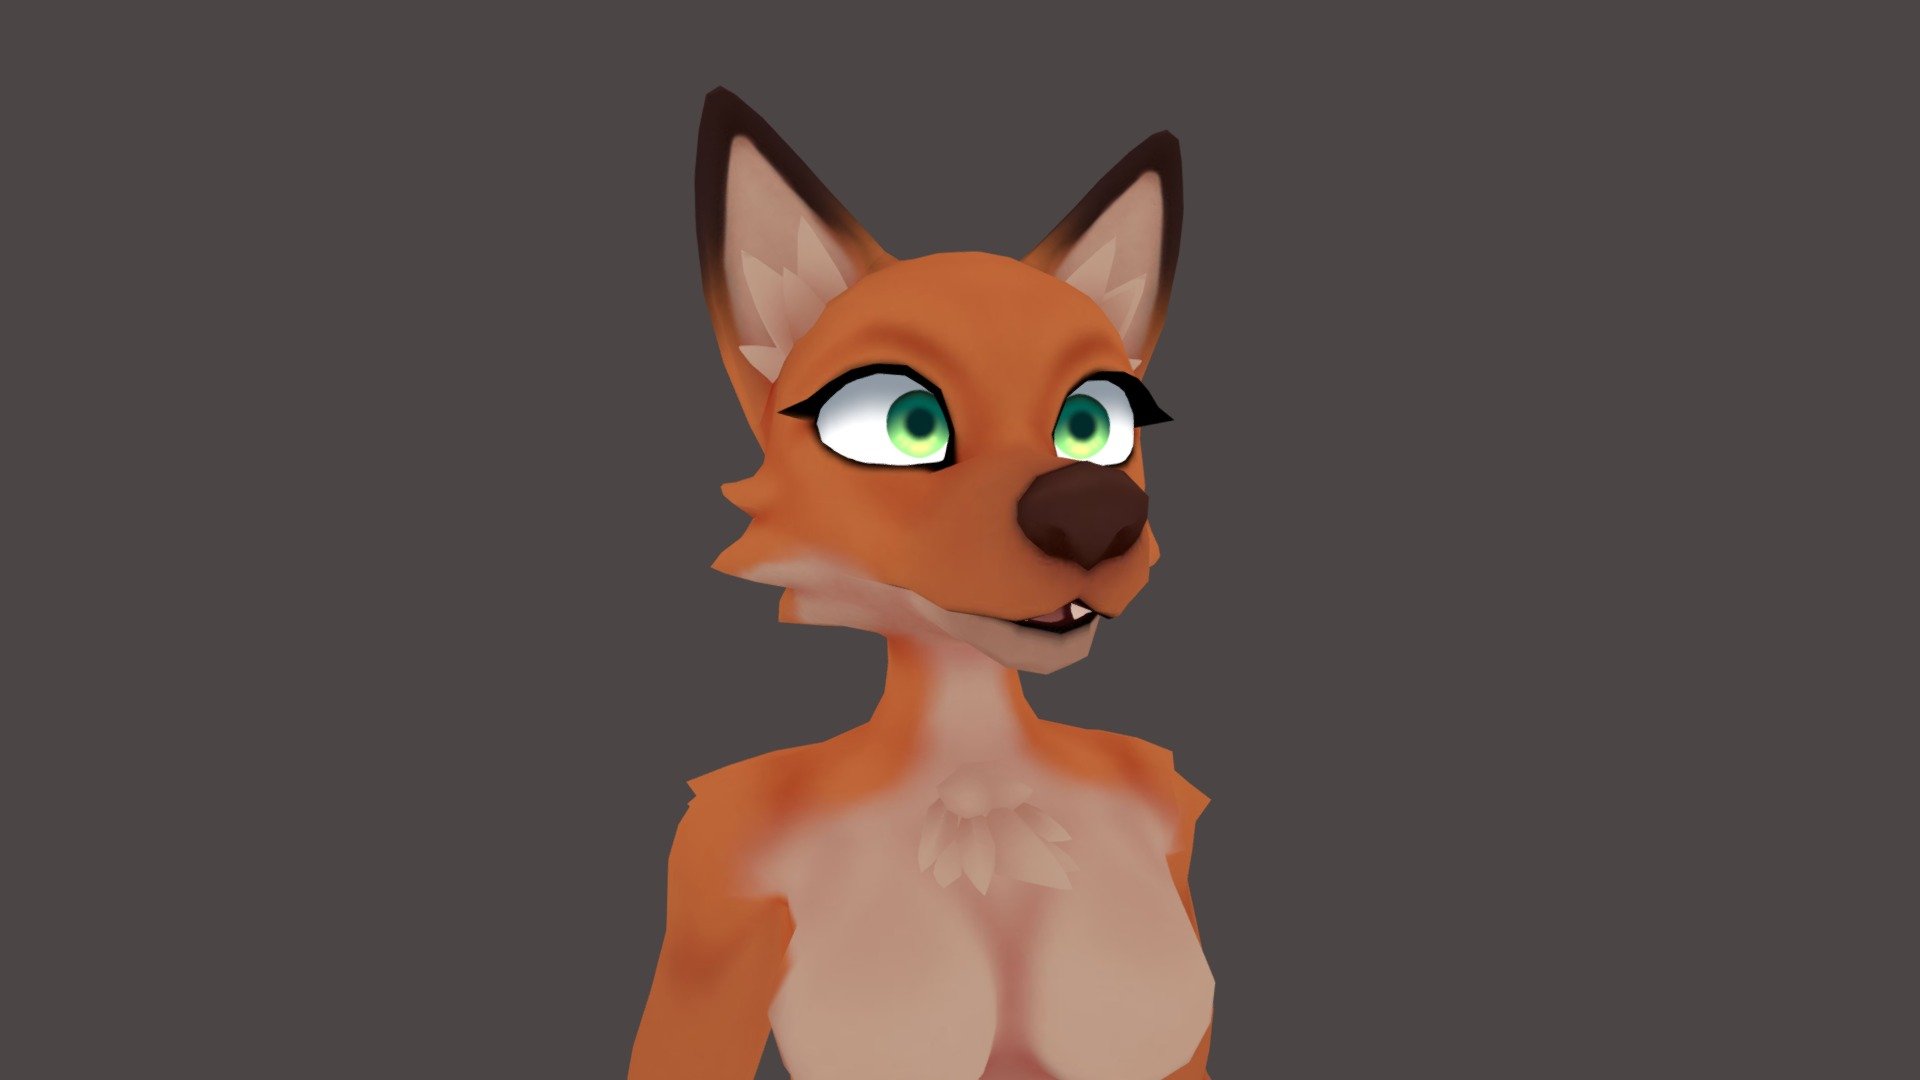 Basic fox model with chest, ear and tail rigged, for purpose of exporting to VR Chat - Fox VR chat - 3D model by Fatguyinspace 3d model